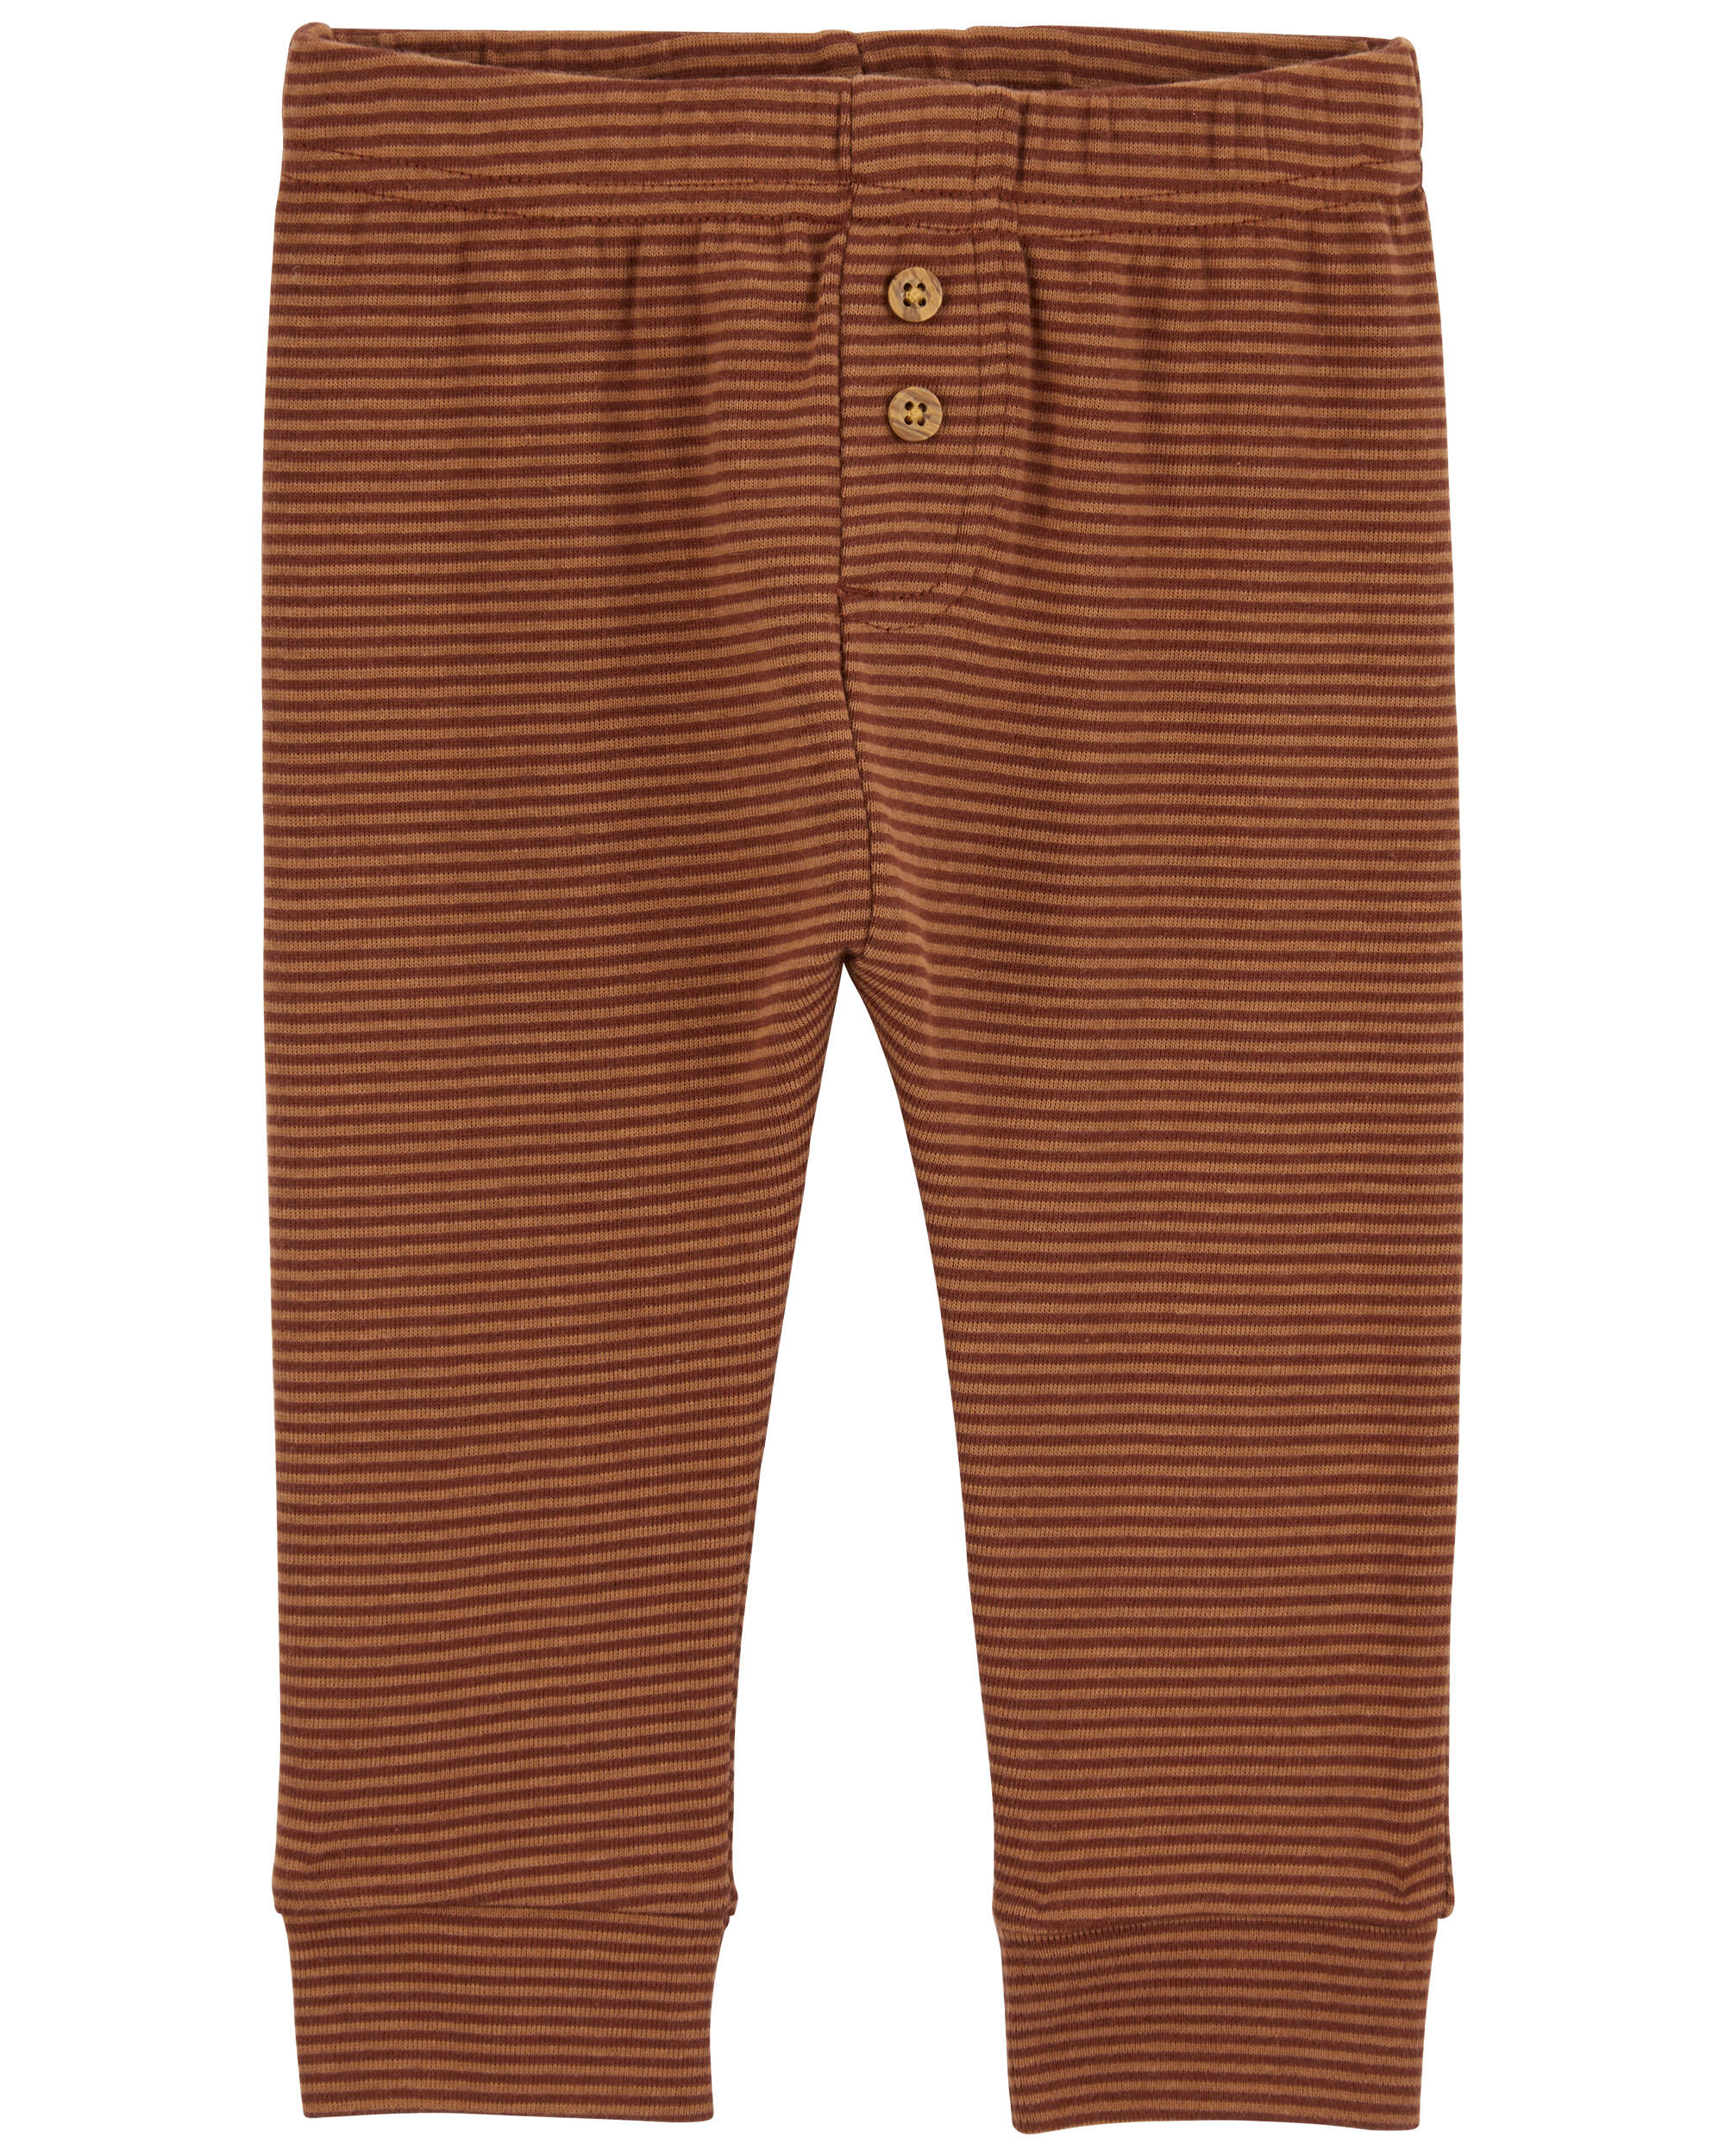 Baby 2-Piece My First Thanksgiving Bodysuit Pant Set